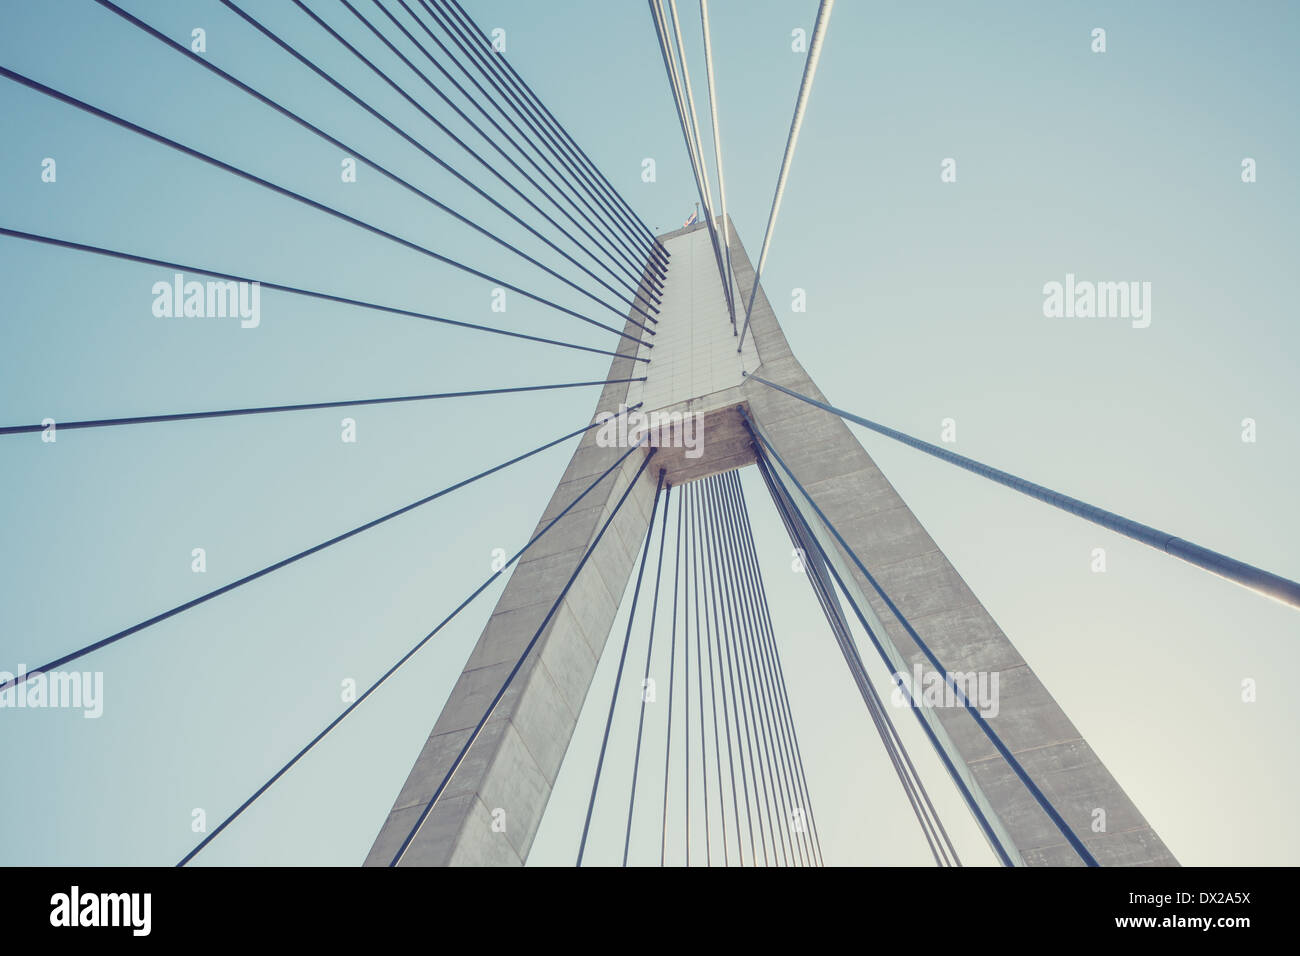 The Anzac Bridge in Sydney showing detail of the suspension uprights and suspension cables. Stock Photo